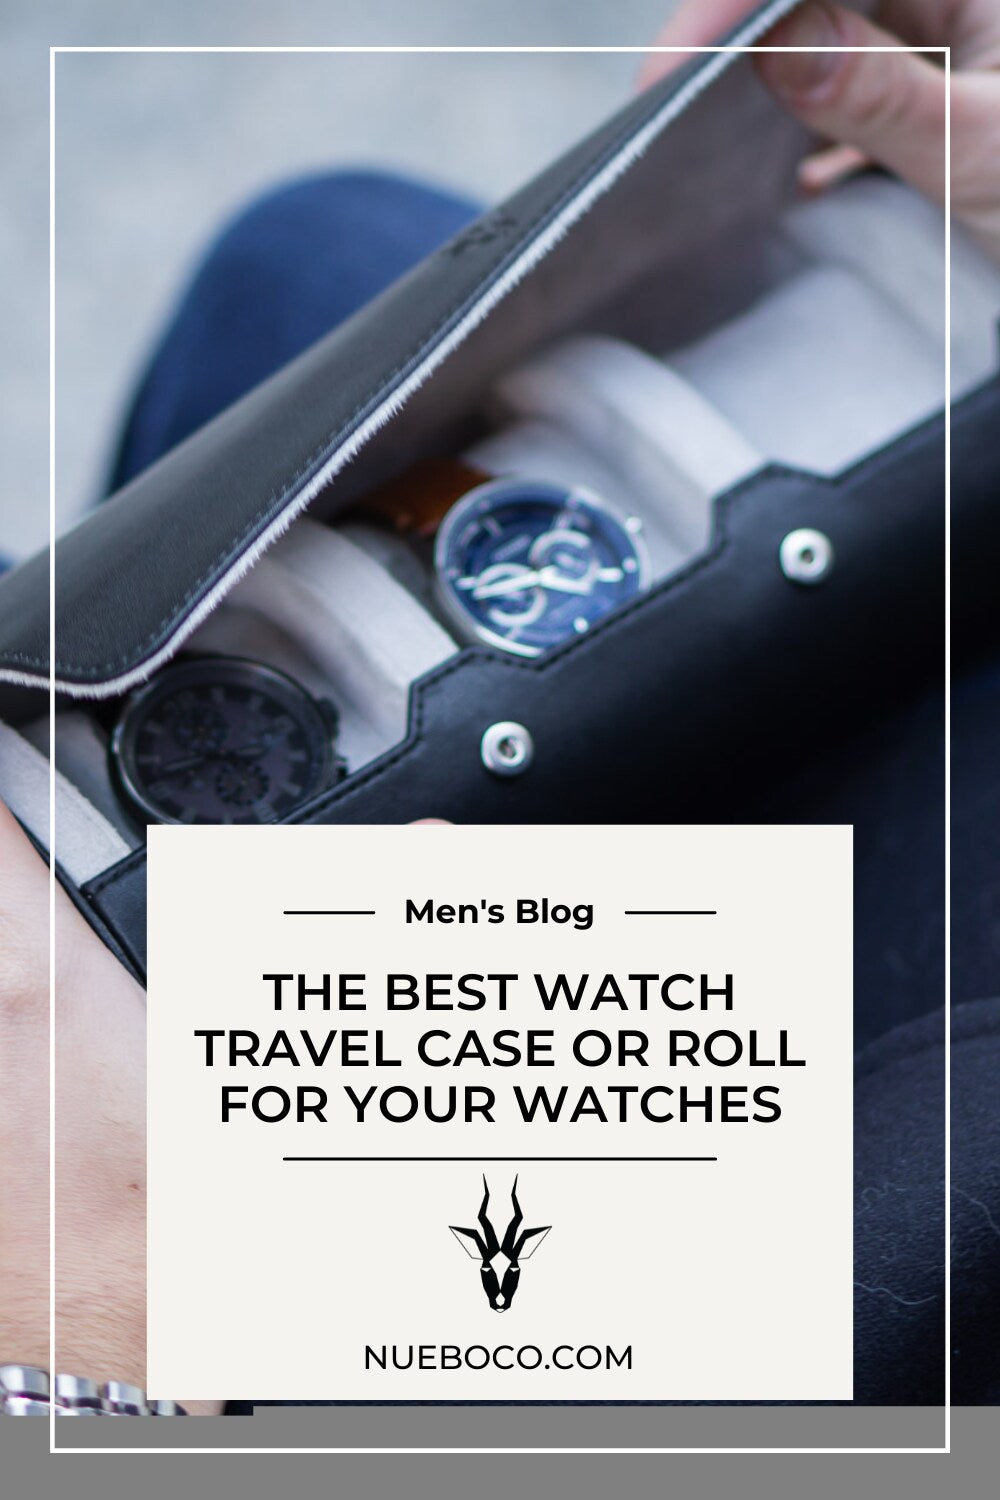 The Best Watch Travel Case or Roll for Your Watches